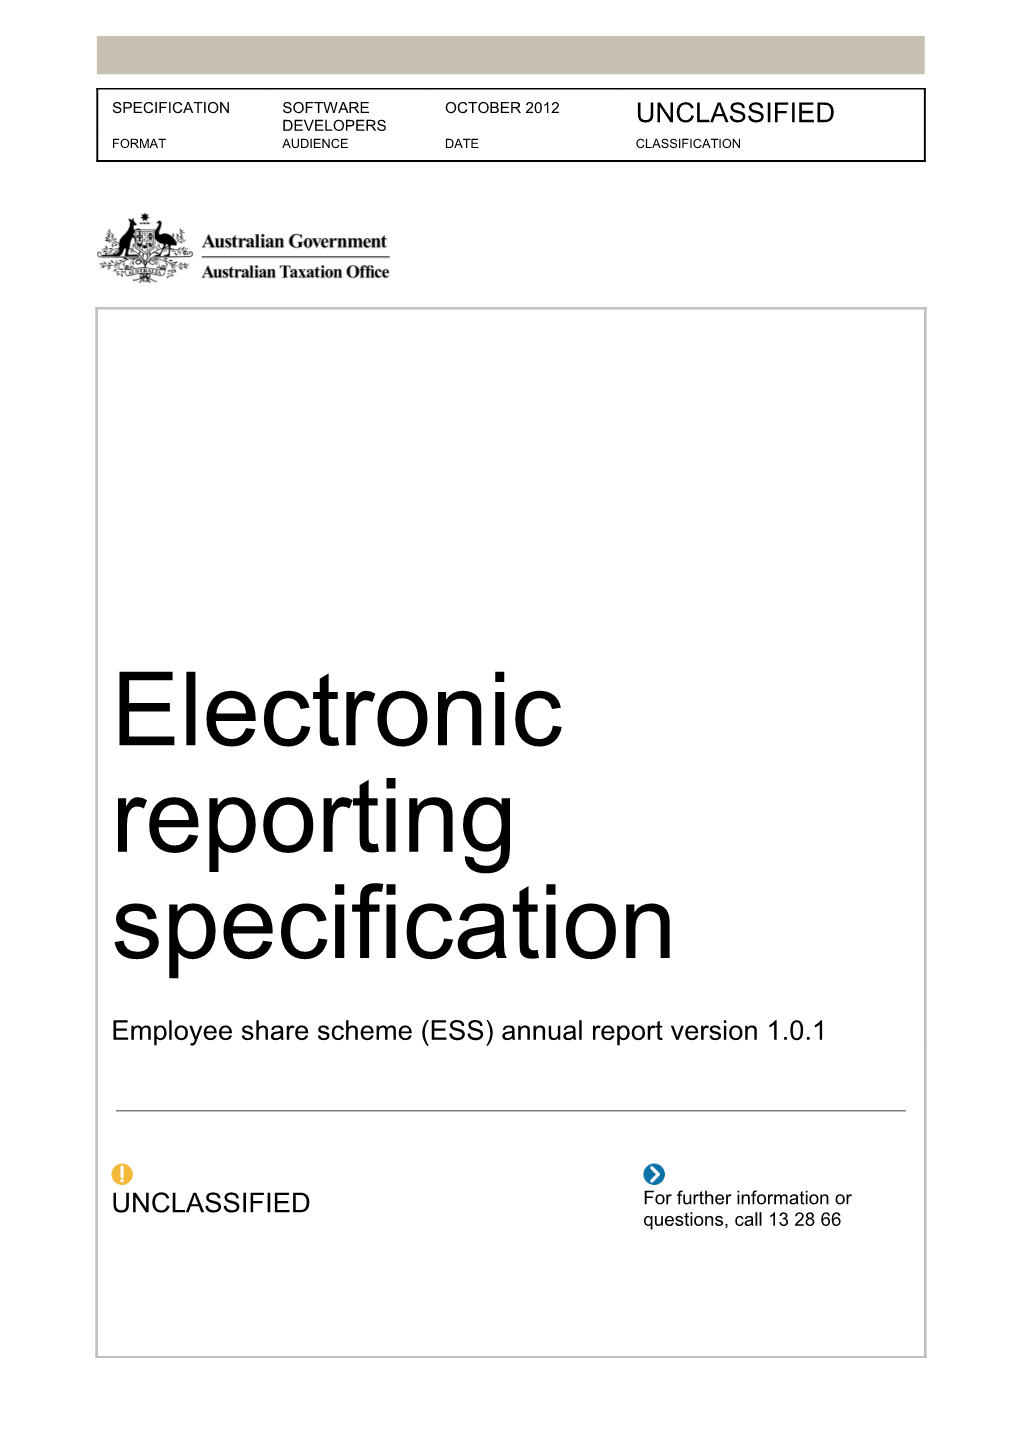 Electronic Reporting Specification - Employee Share Scheme (Ess) Annual Report